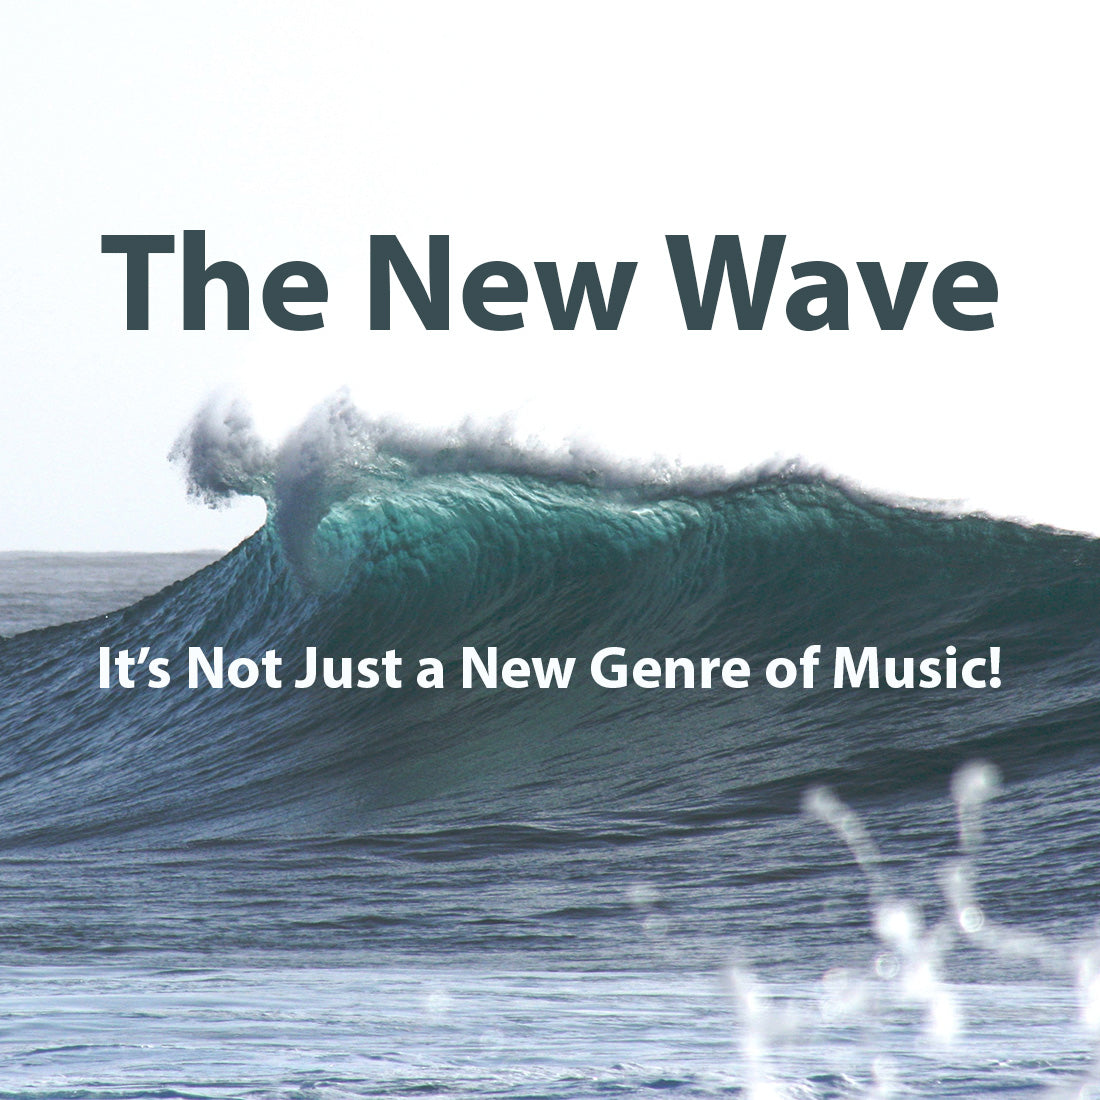 The New Wave. It's not just a genre of music!